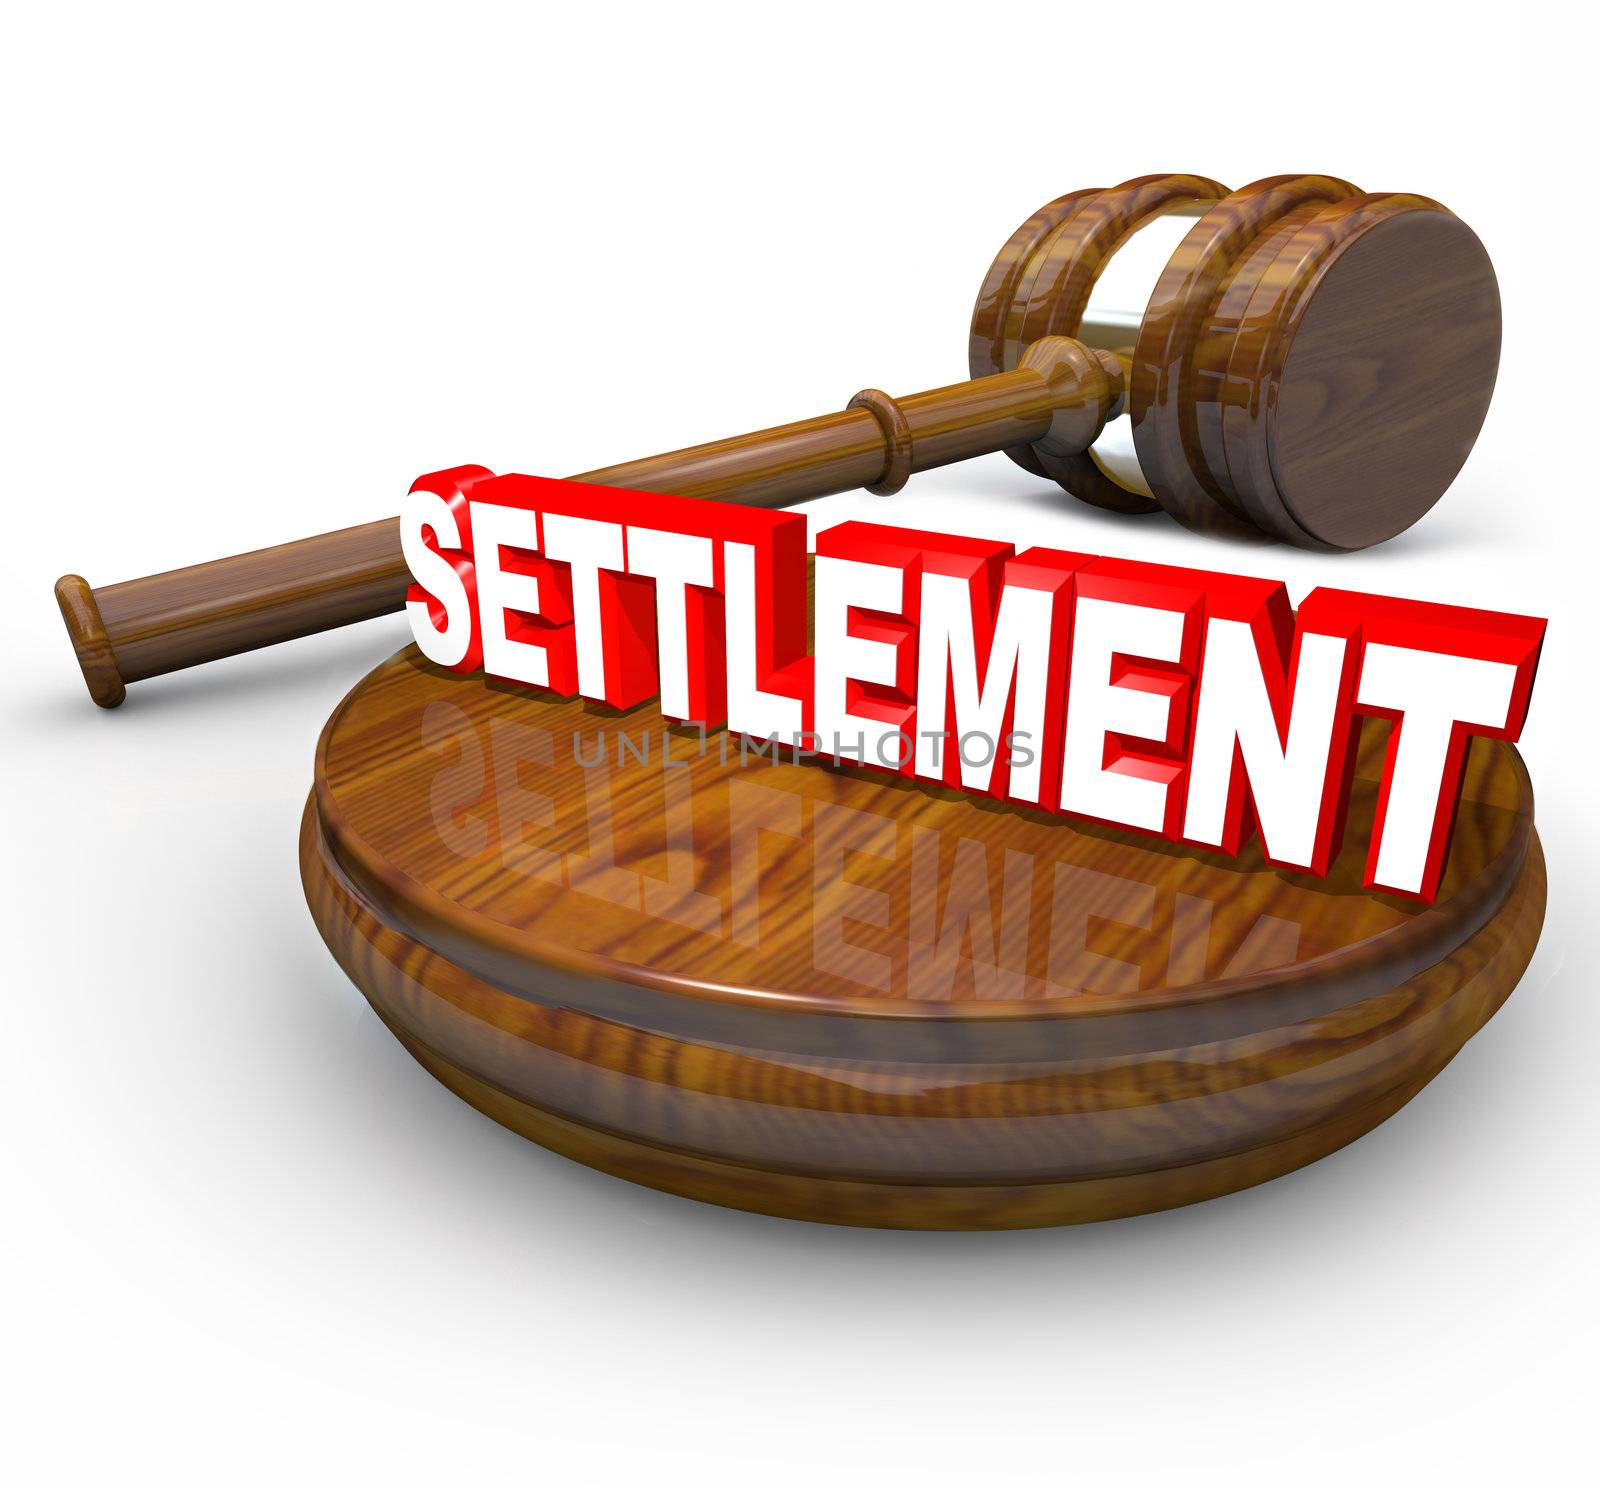 The word Settlement on a wood block beside a judge's gavel, indicating a legal lawsuit has been settled in a decision with an agreement between the plantiff and defendant